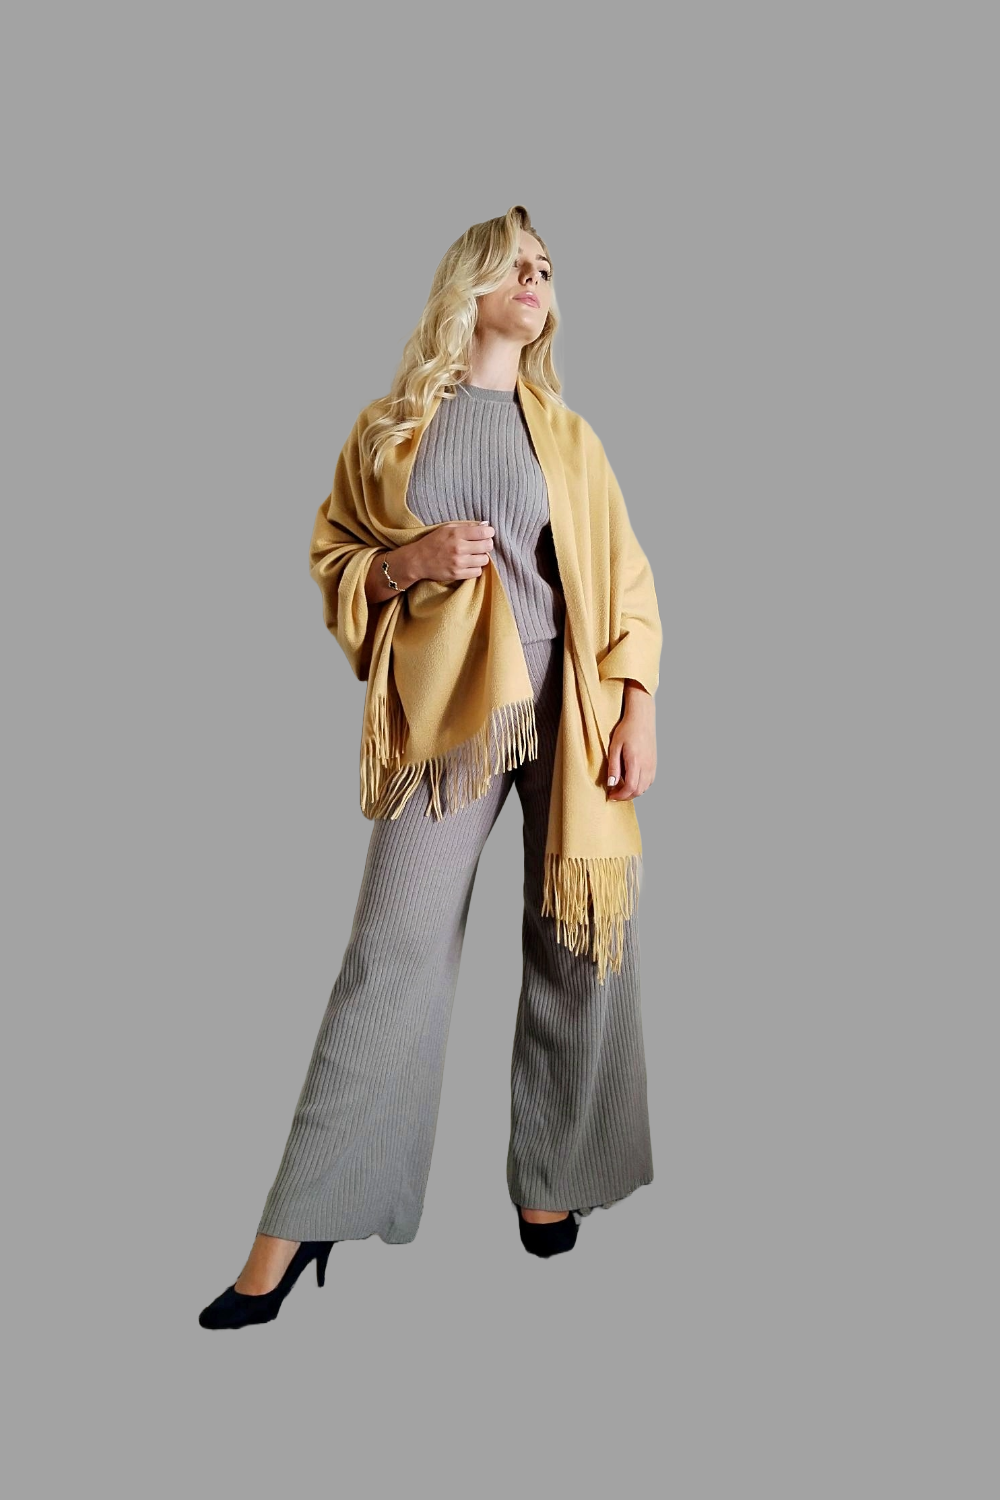 100% Cashmere Shawl in Light Camel Colour